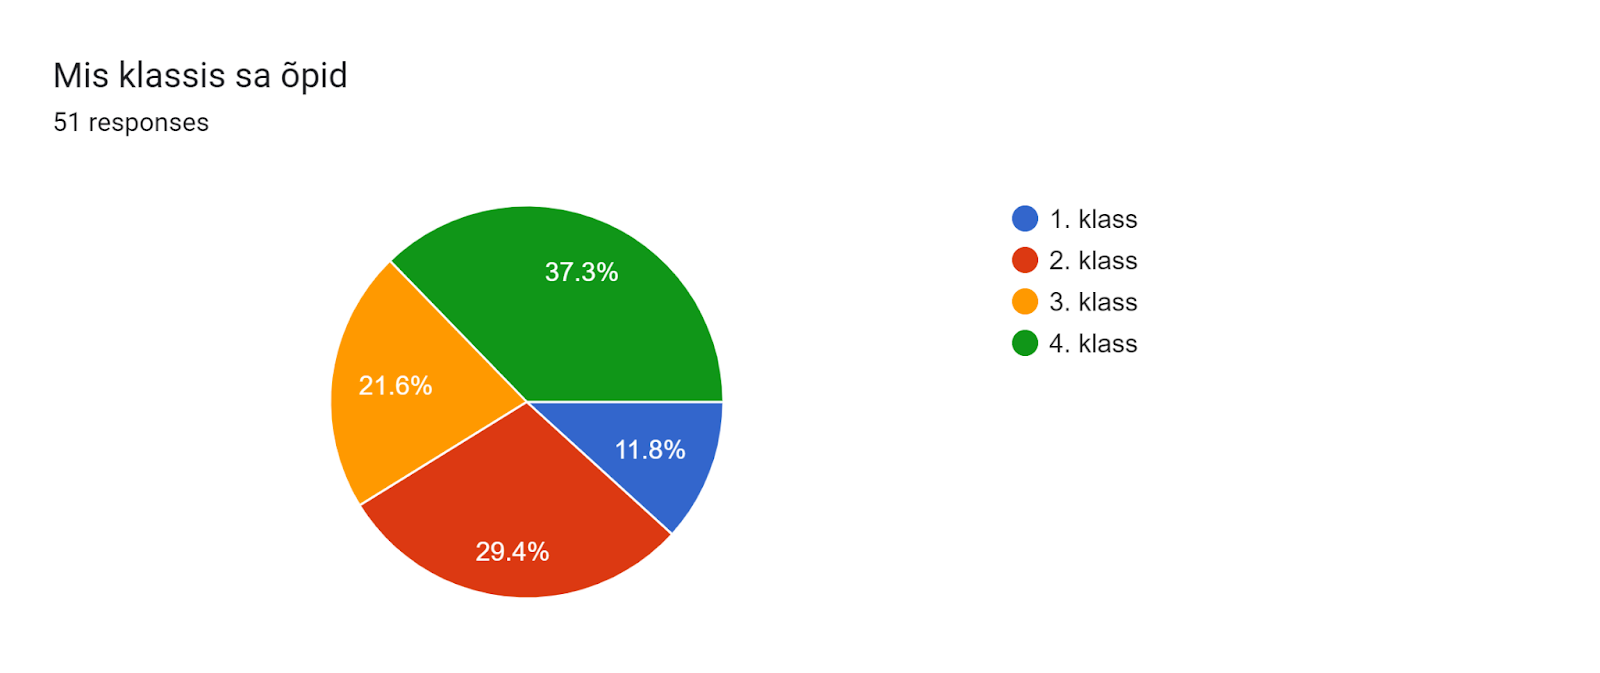 Forms response chart. Question title: Mis klassis sa õpid. Number of responses: 51 responses.